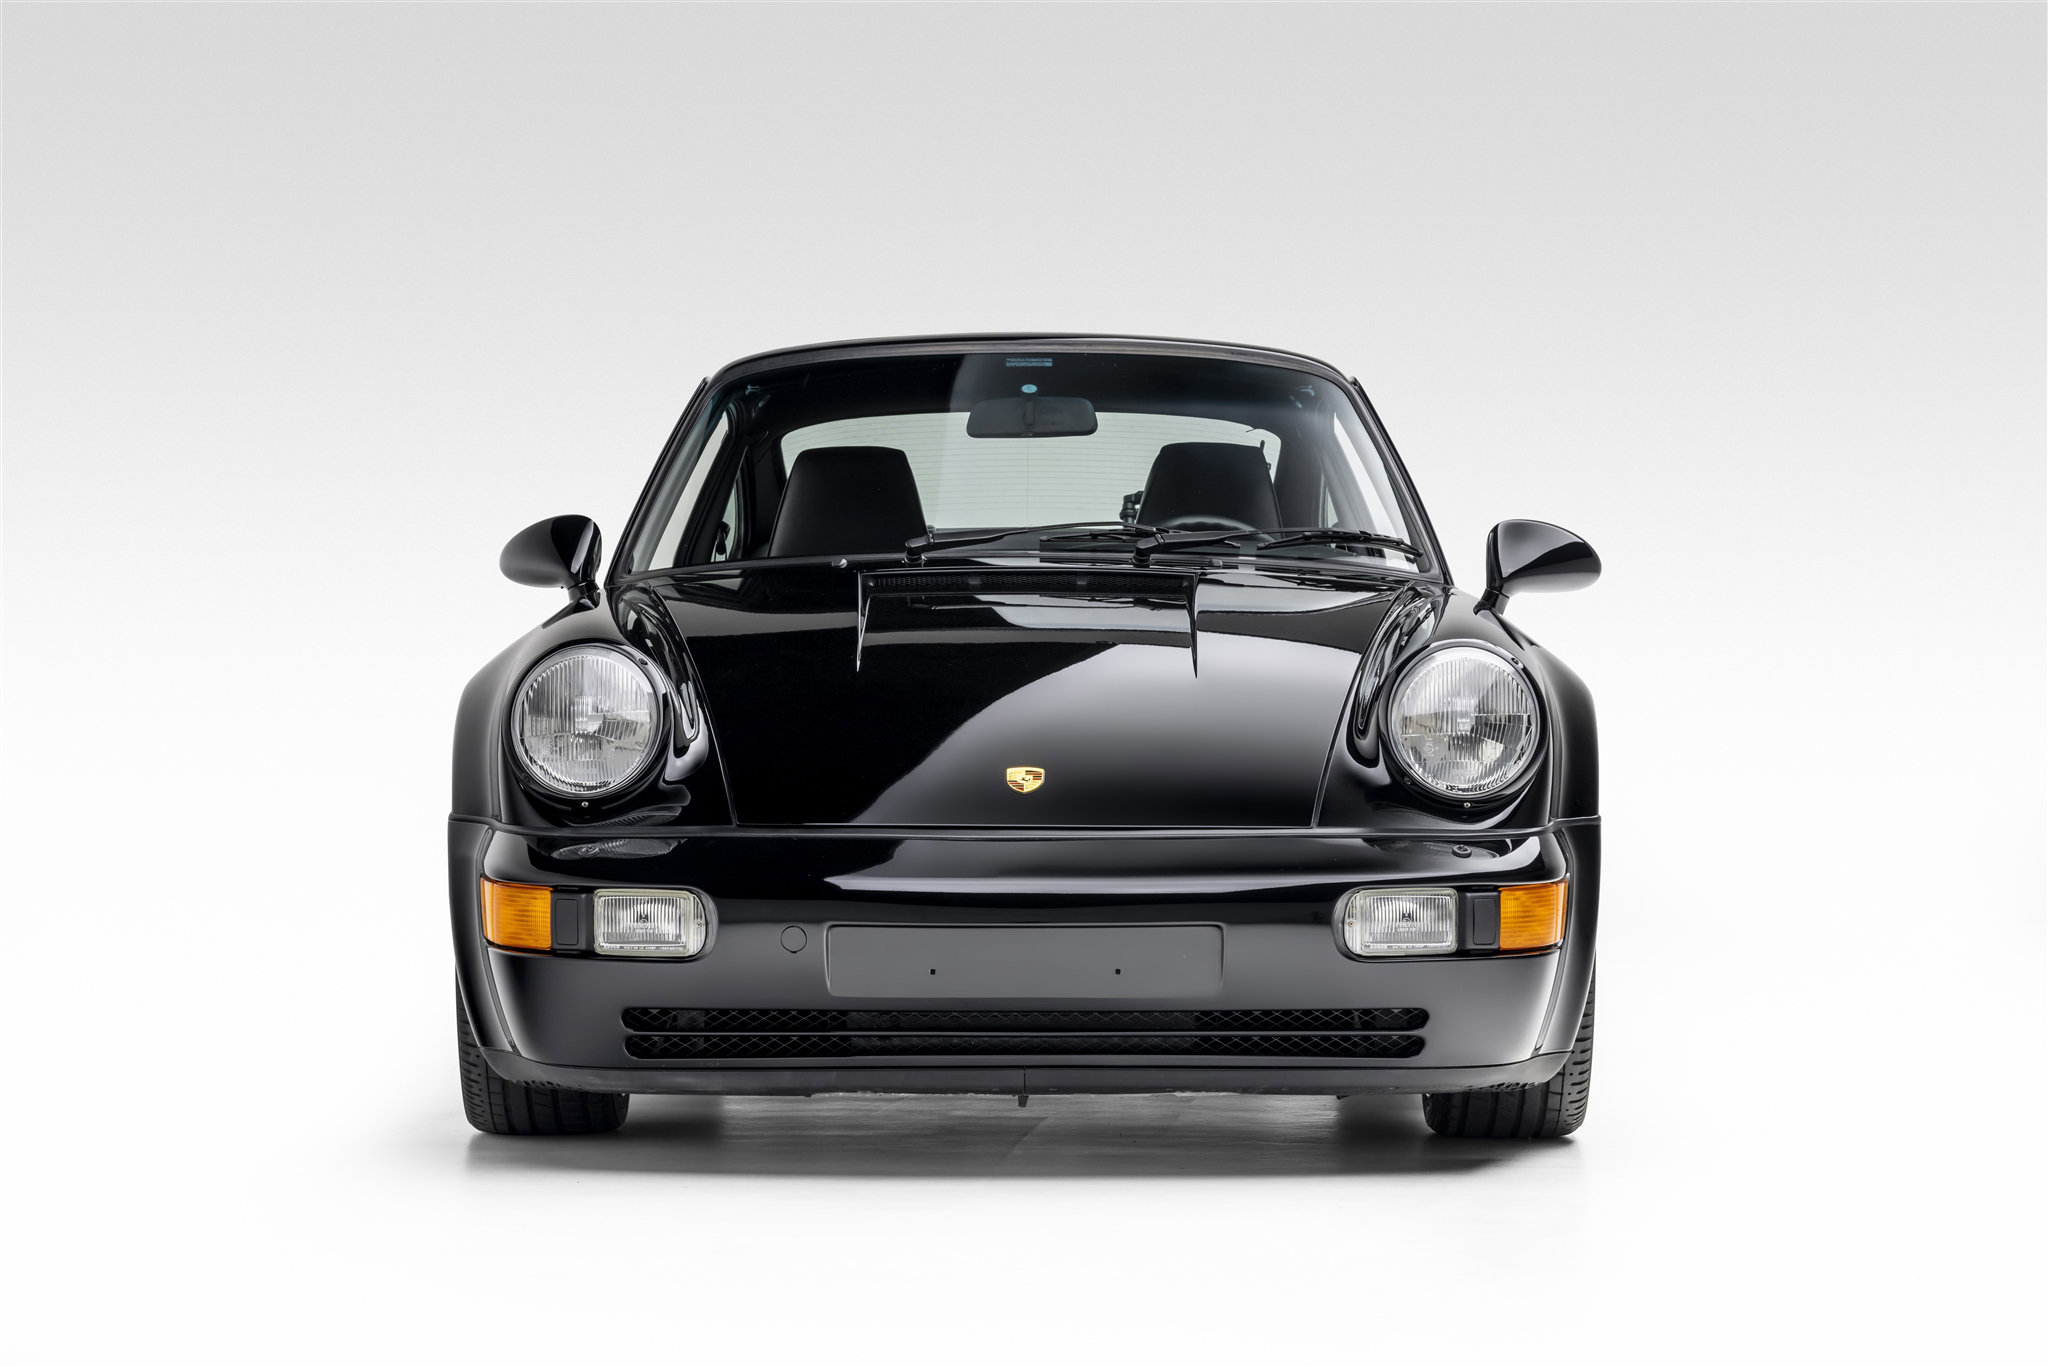 1994 Porsche 911 Turbo S 3.6 'Package' ted7.com ©2023 Courtesy of RM Sotheby's